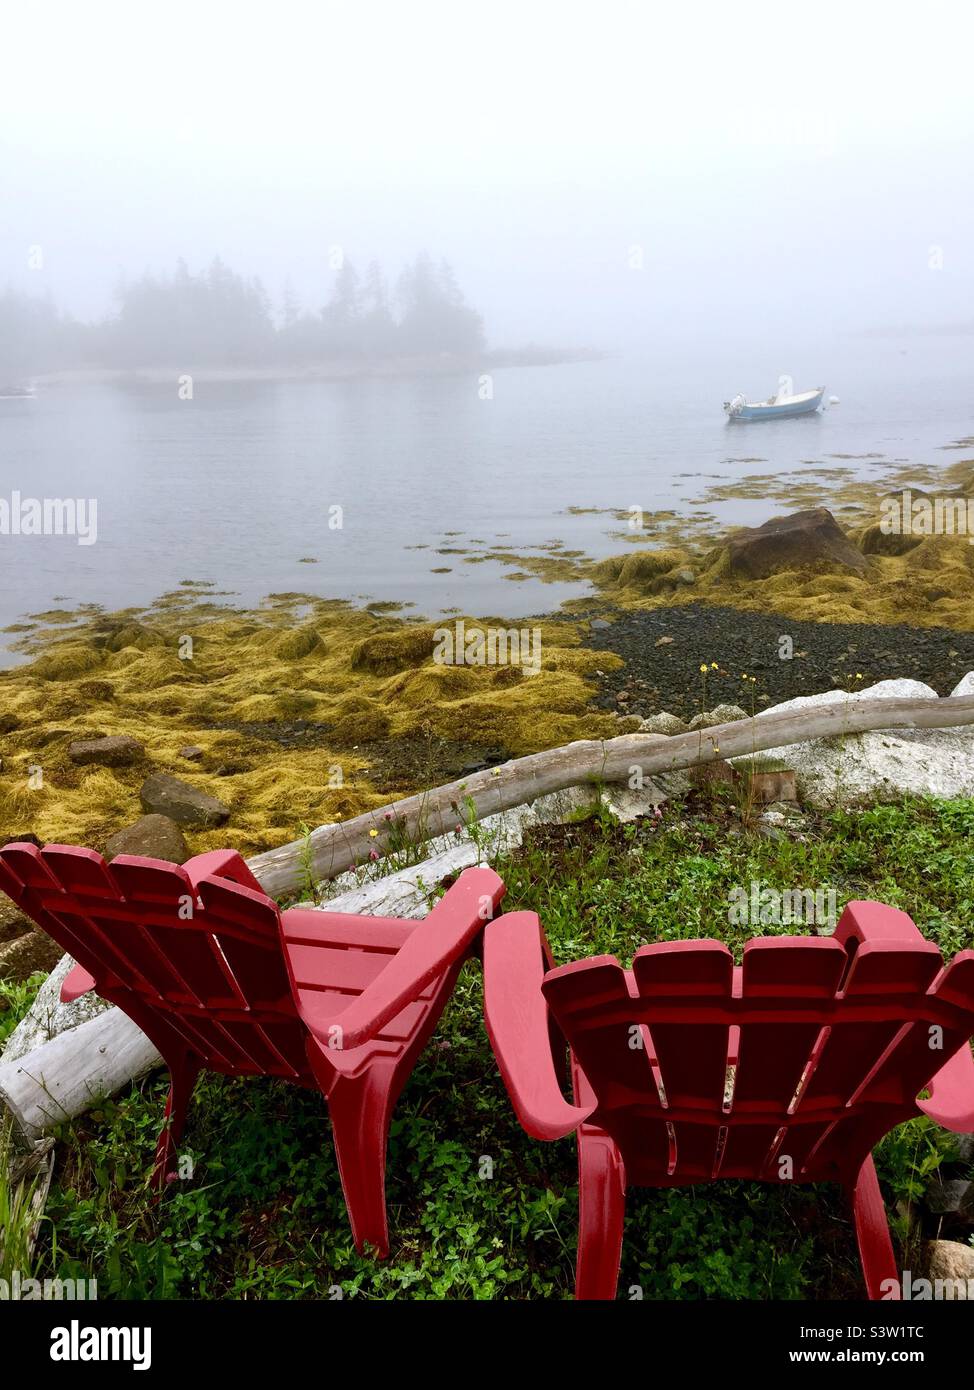 Waiting for fog to lift in a cove of the Atlantic Ocean, Halifax, Canada. Perfect spot for sitting, reflecting, or quiet contemplation. Stock Photo